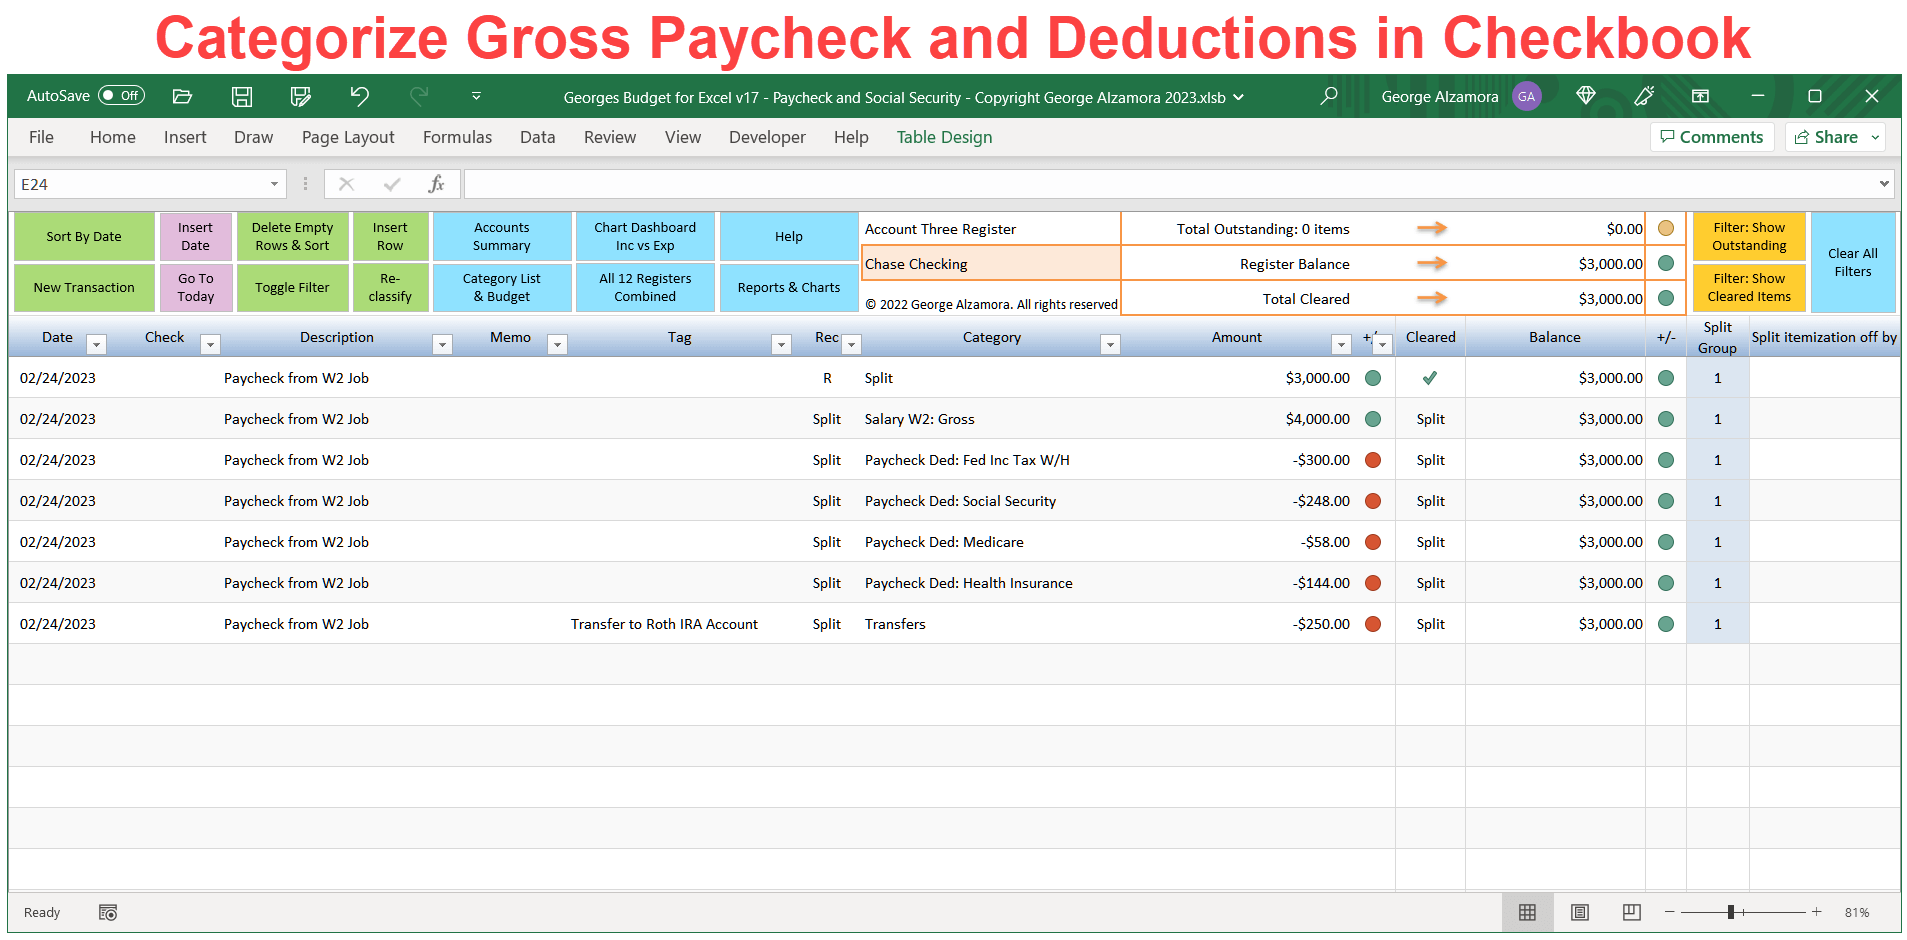 Categorize Paycheck and Deductions in Checkbook Software